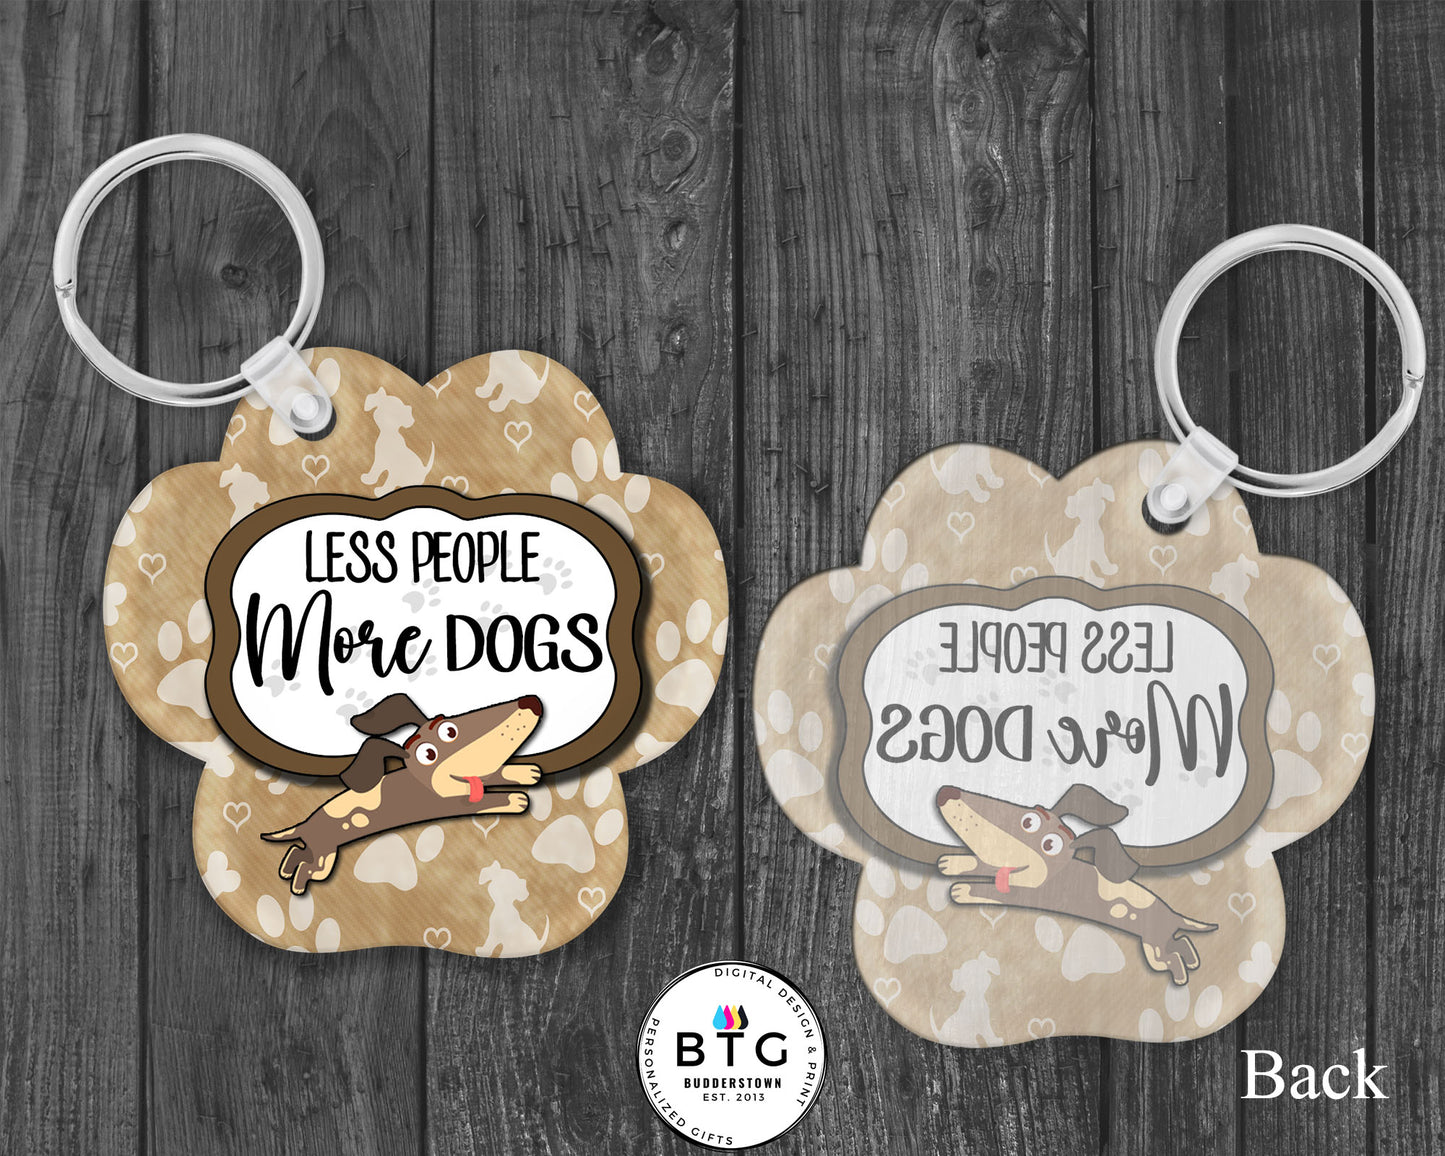 Less People More Dogs - Dog Lover Keychain - Dog Lover Gift